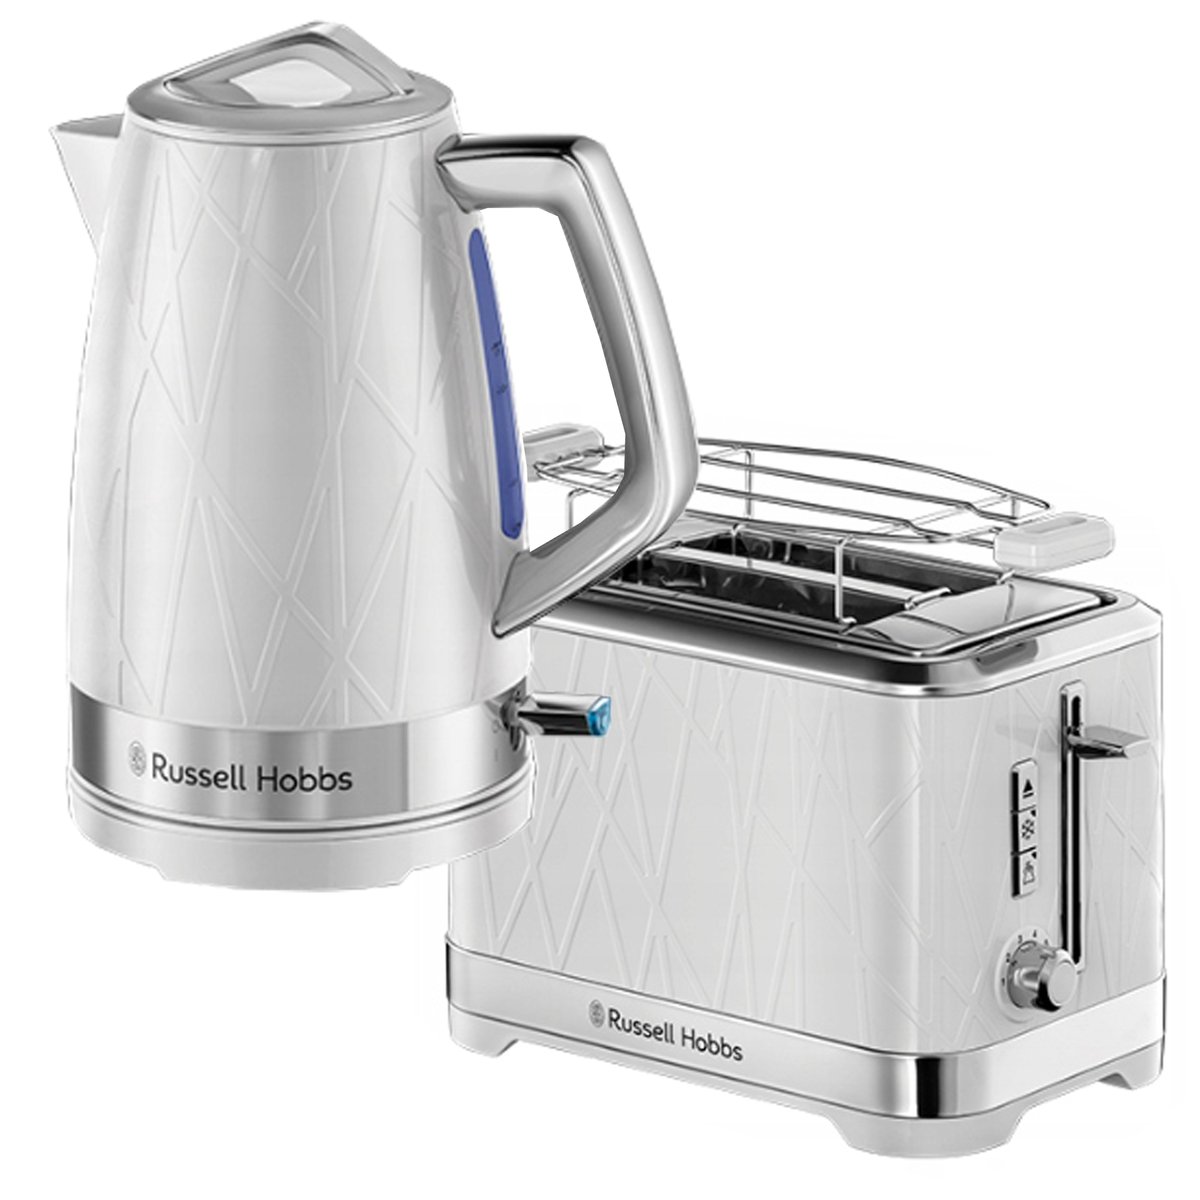 Russell Hobbs Structure 28080-70